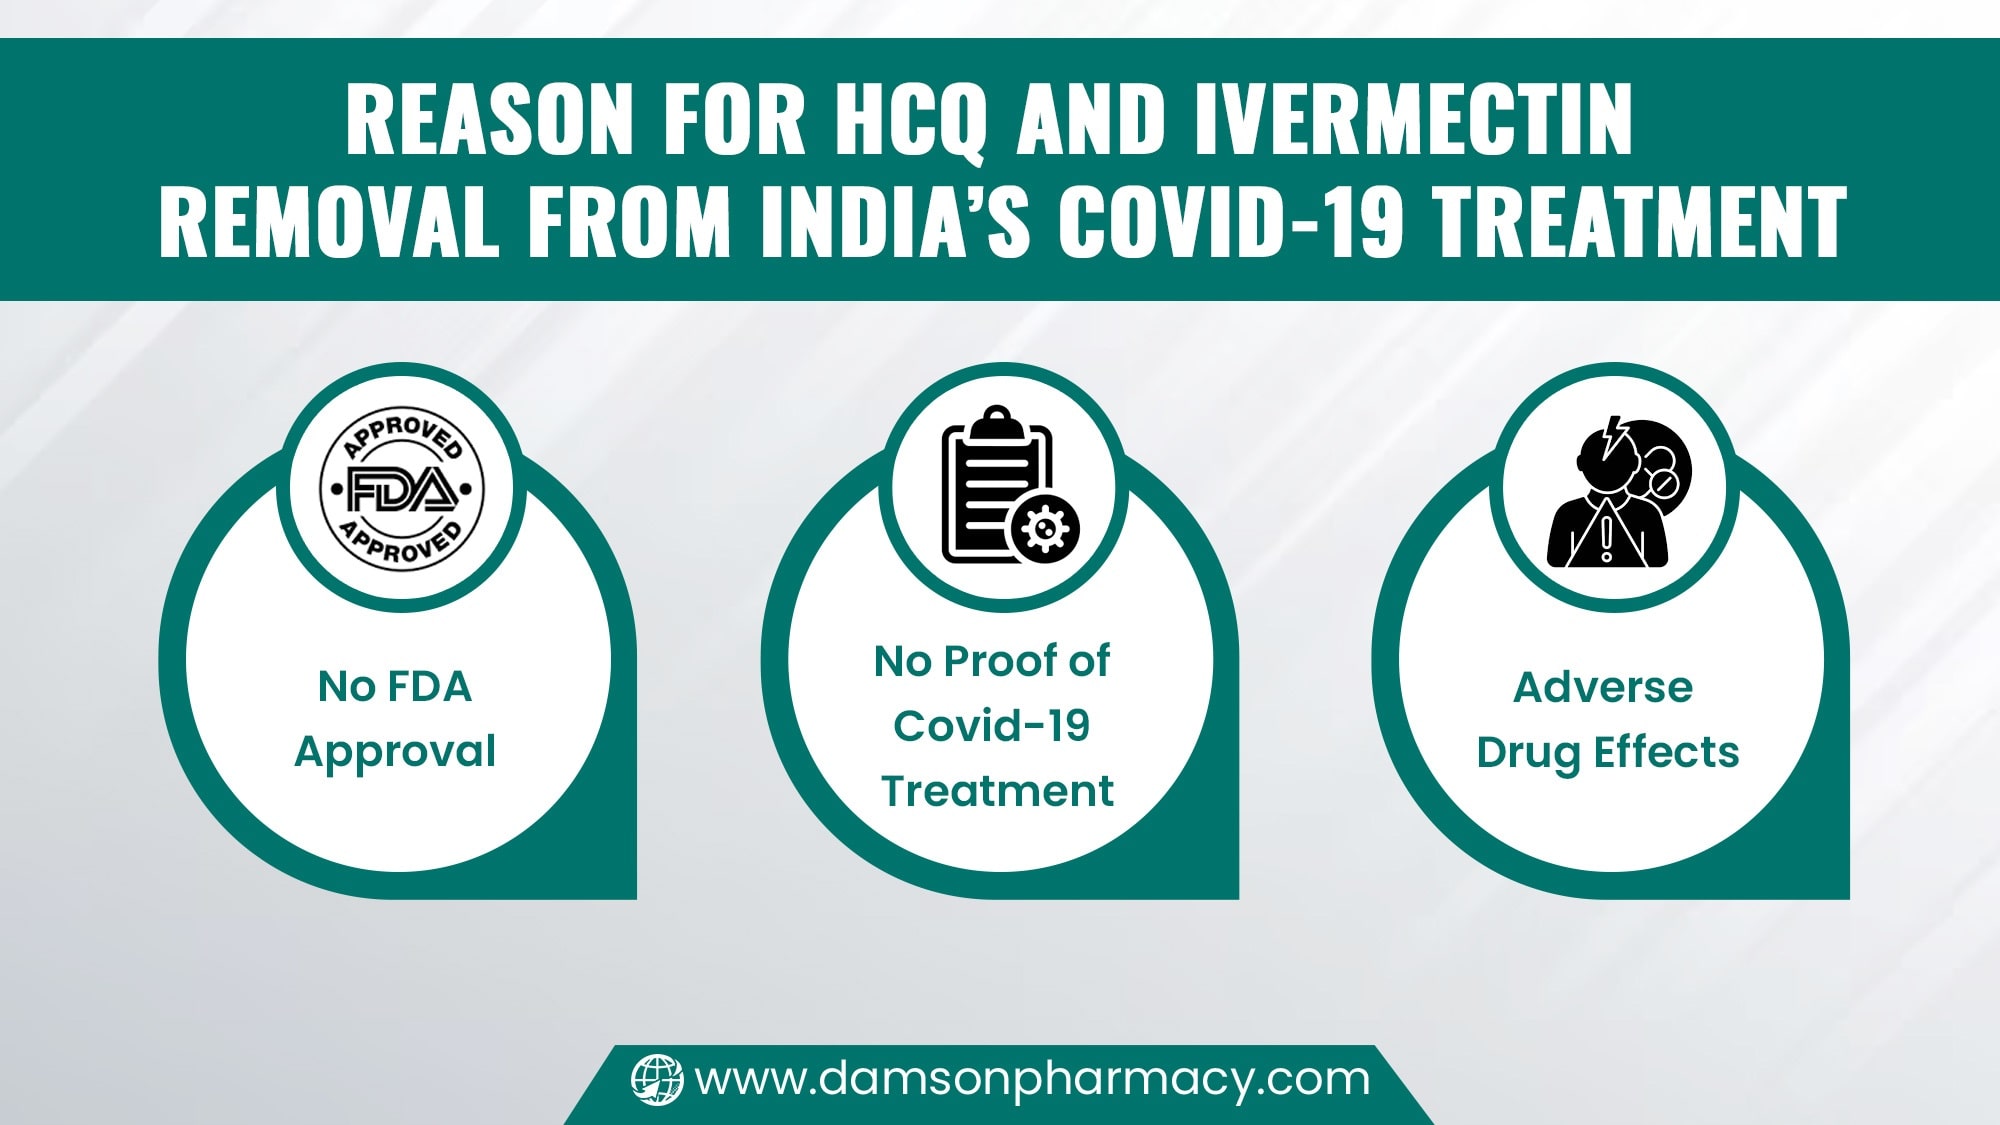 Reason for HCQ and Ivermectin Removal from India’s Covid-19 Treatment